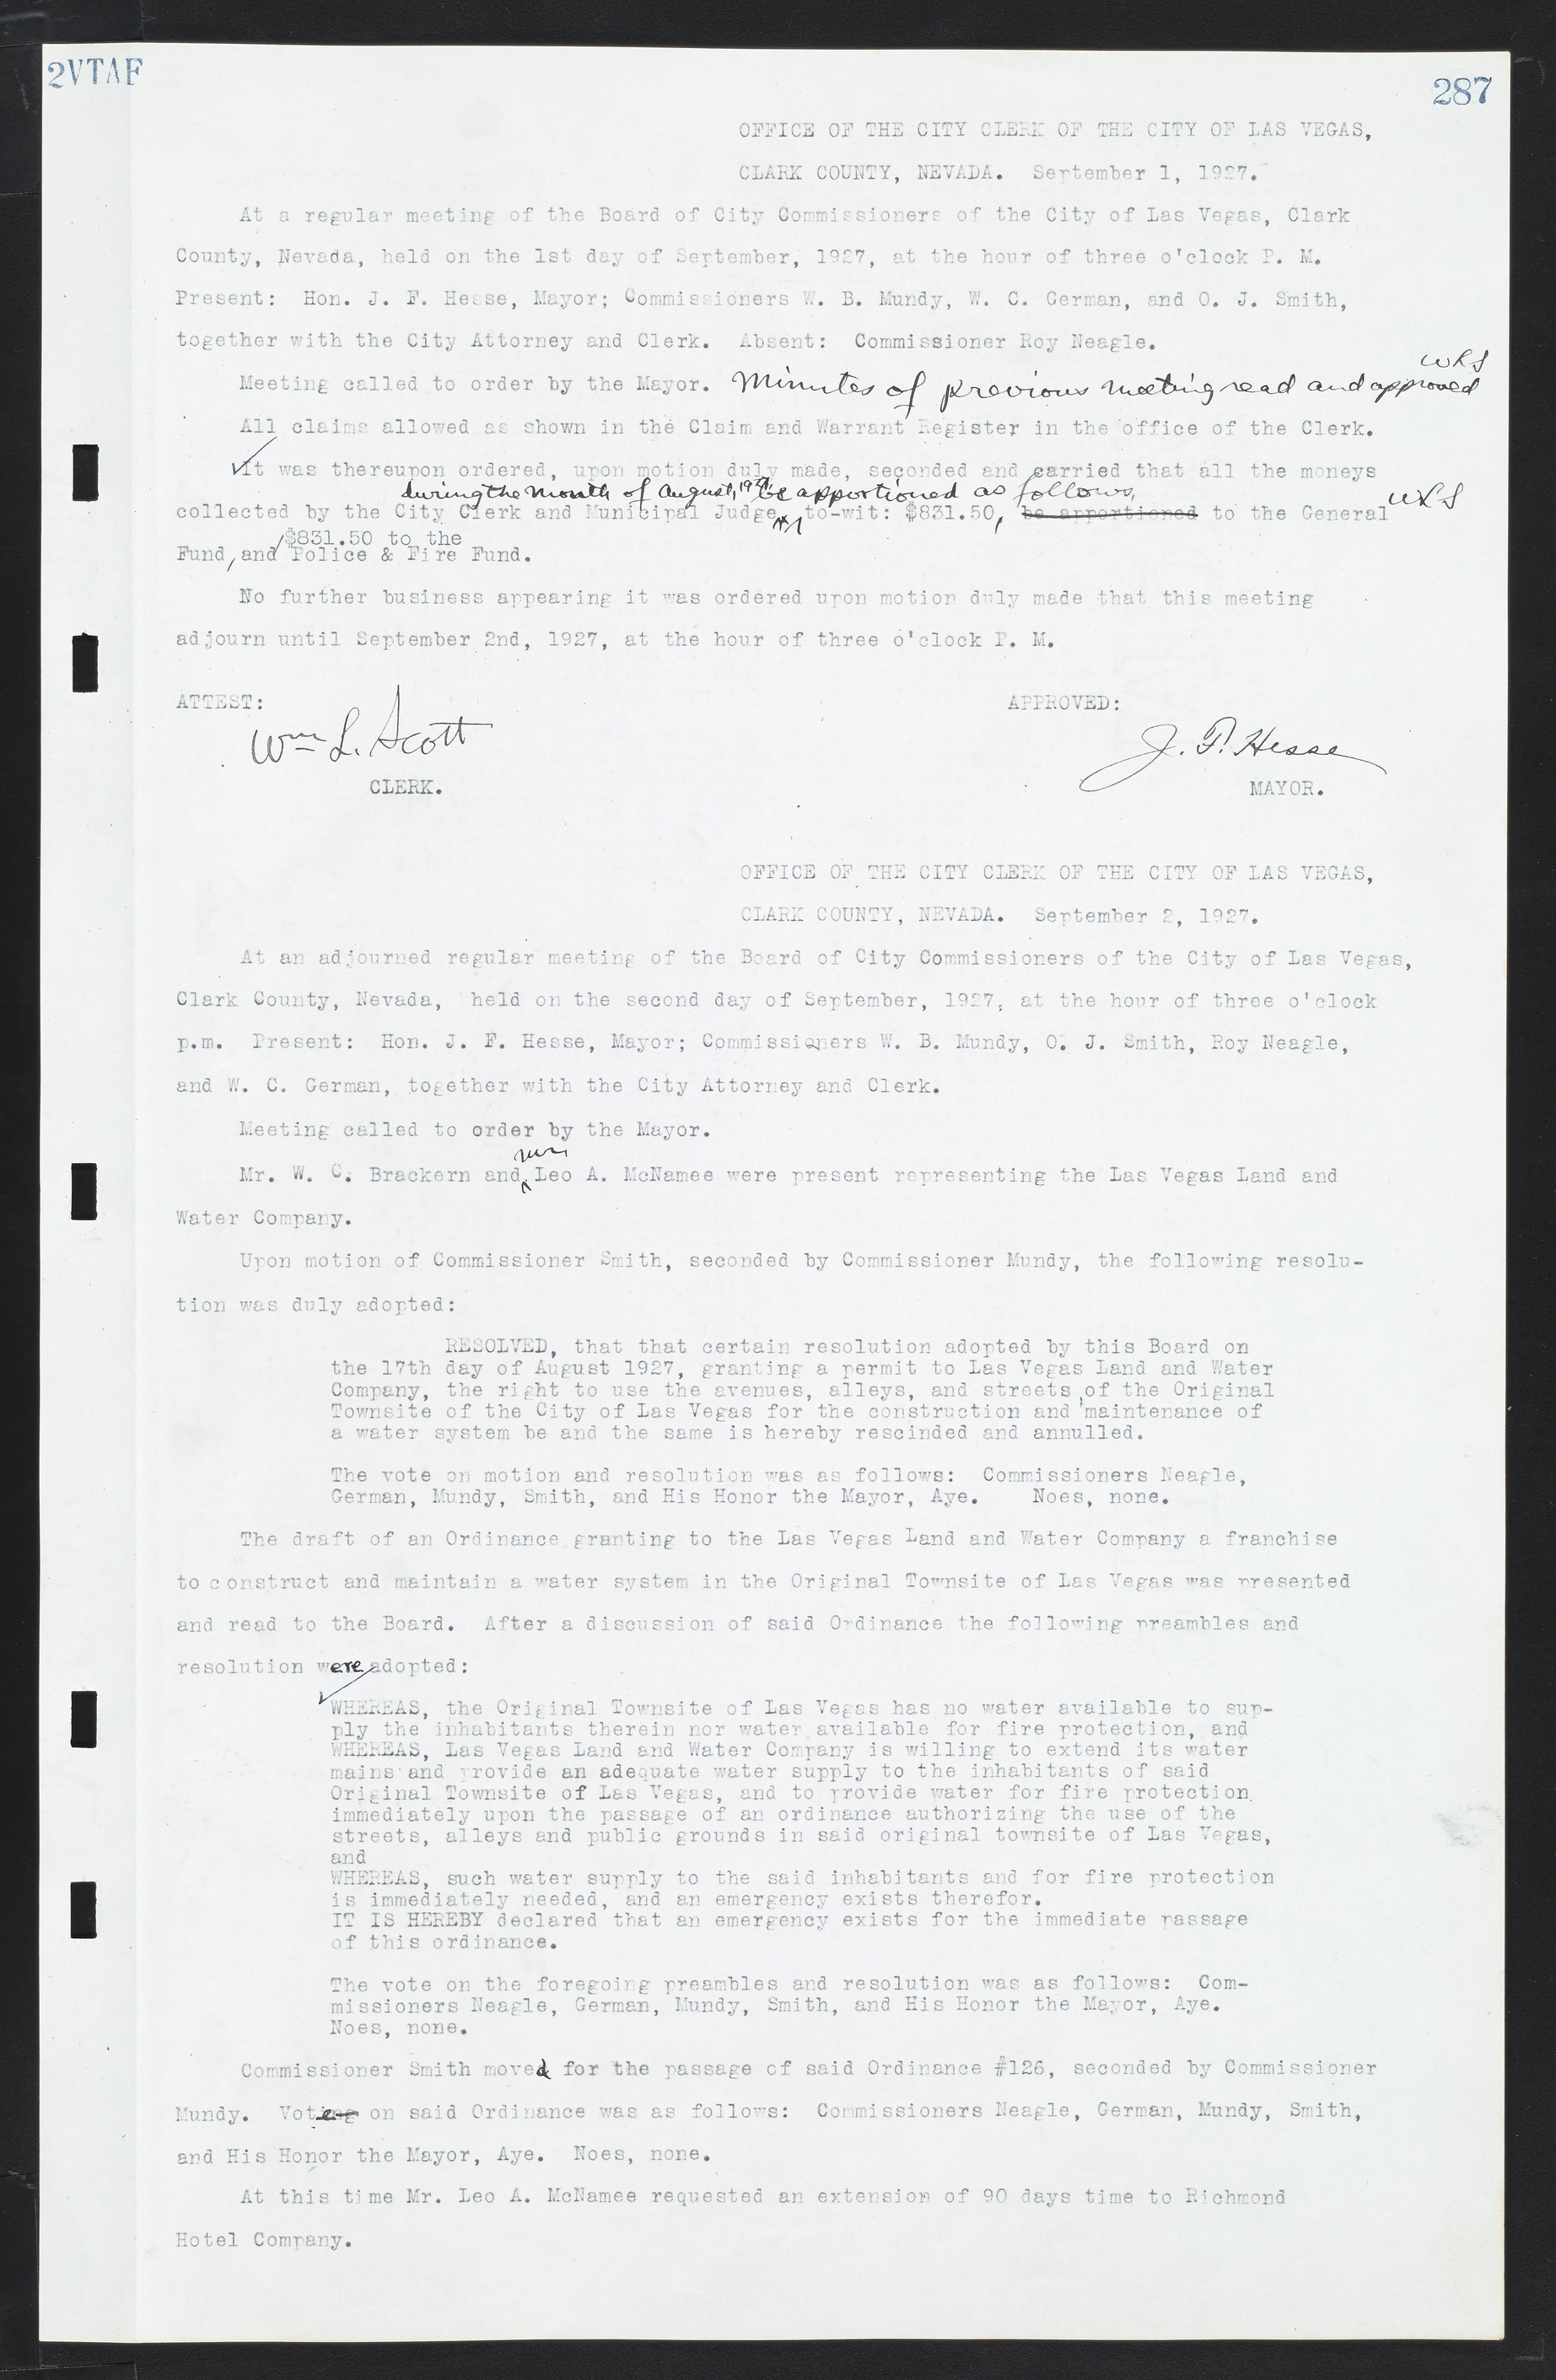 Las Vegas City Commission Minutes, March 1, 1922 to May 10, 1929, lvc000002-296